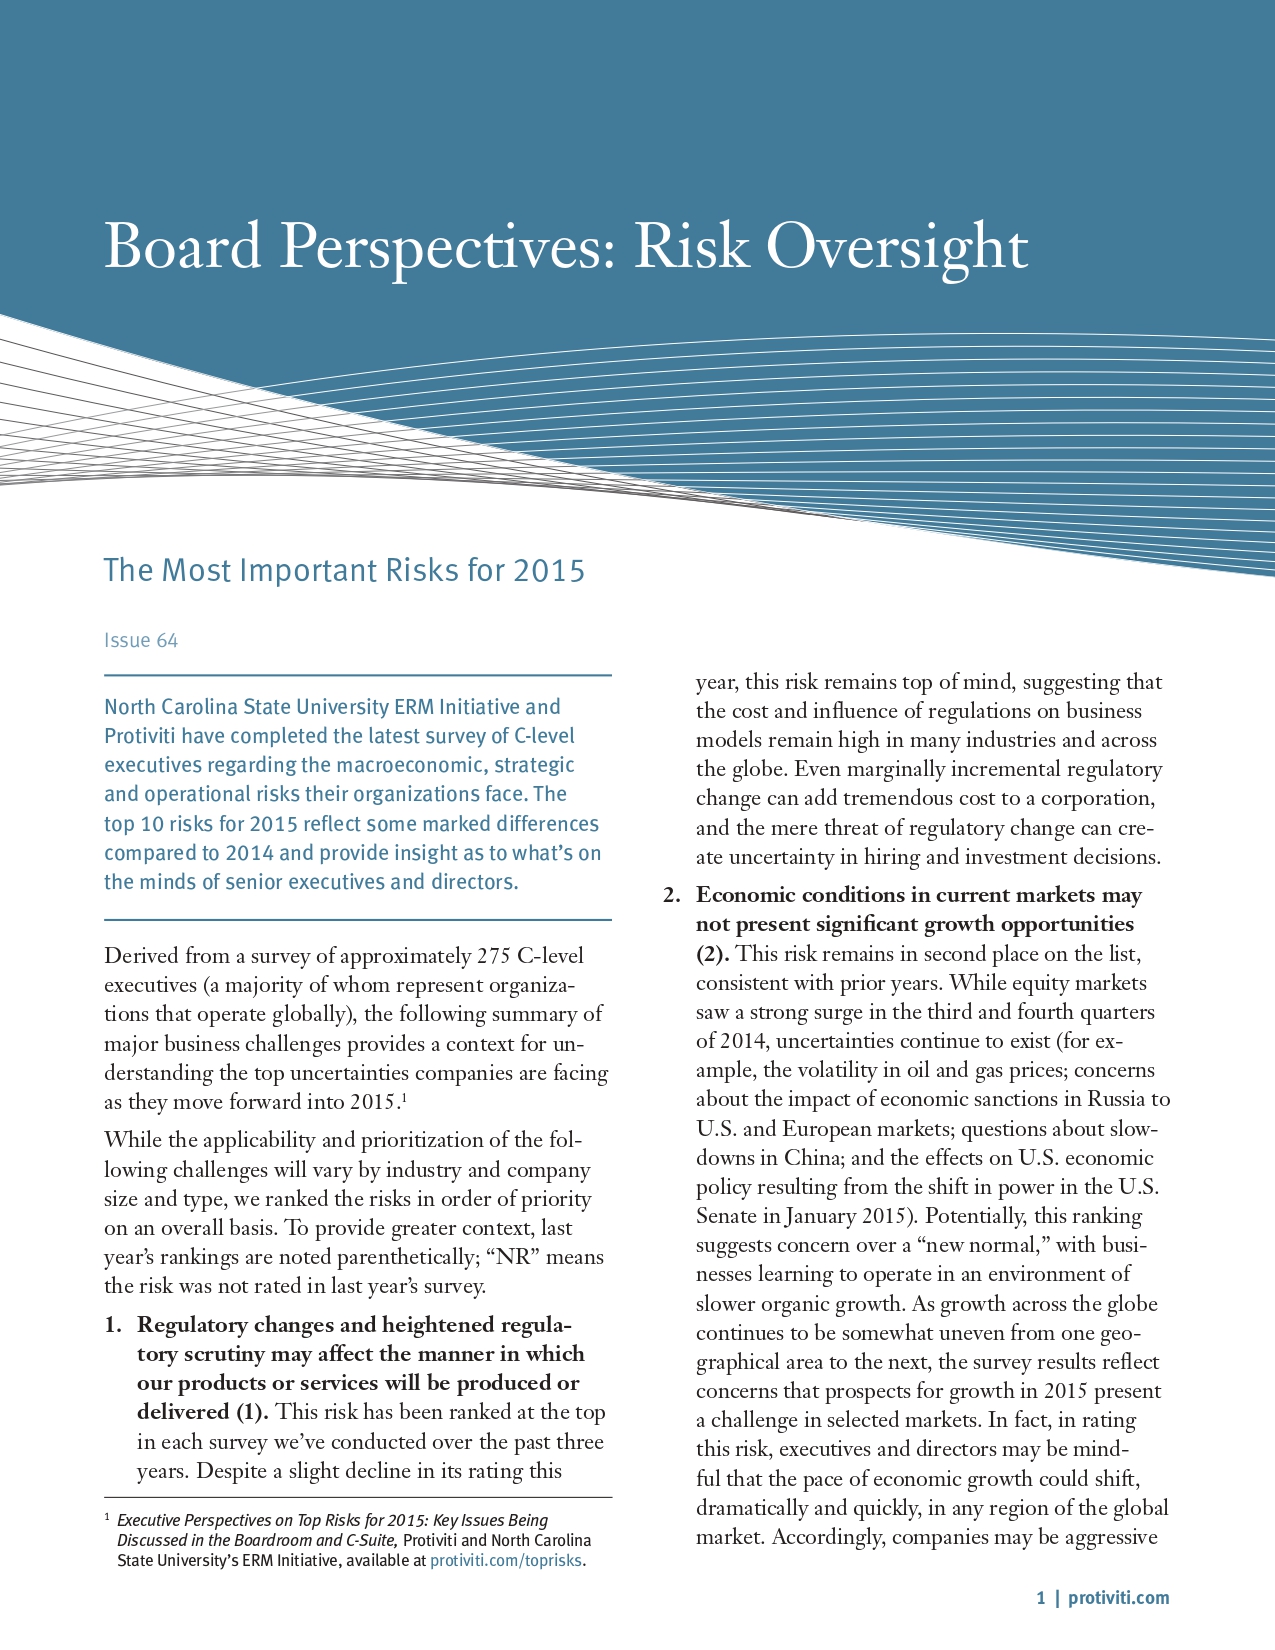 Screenshot of the first page of The Most Important Risks for 2015.